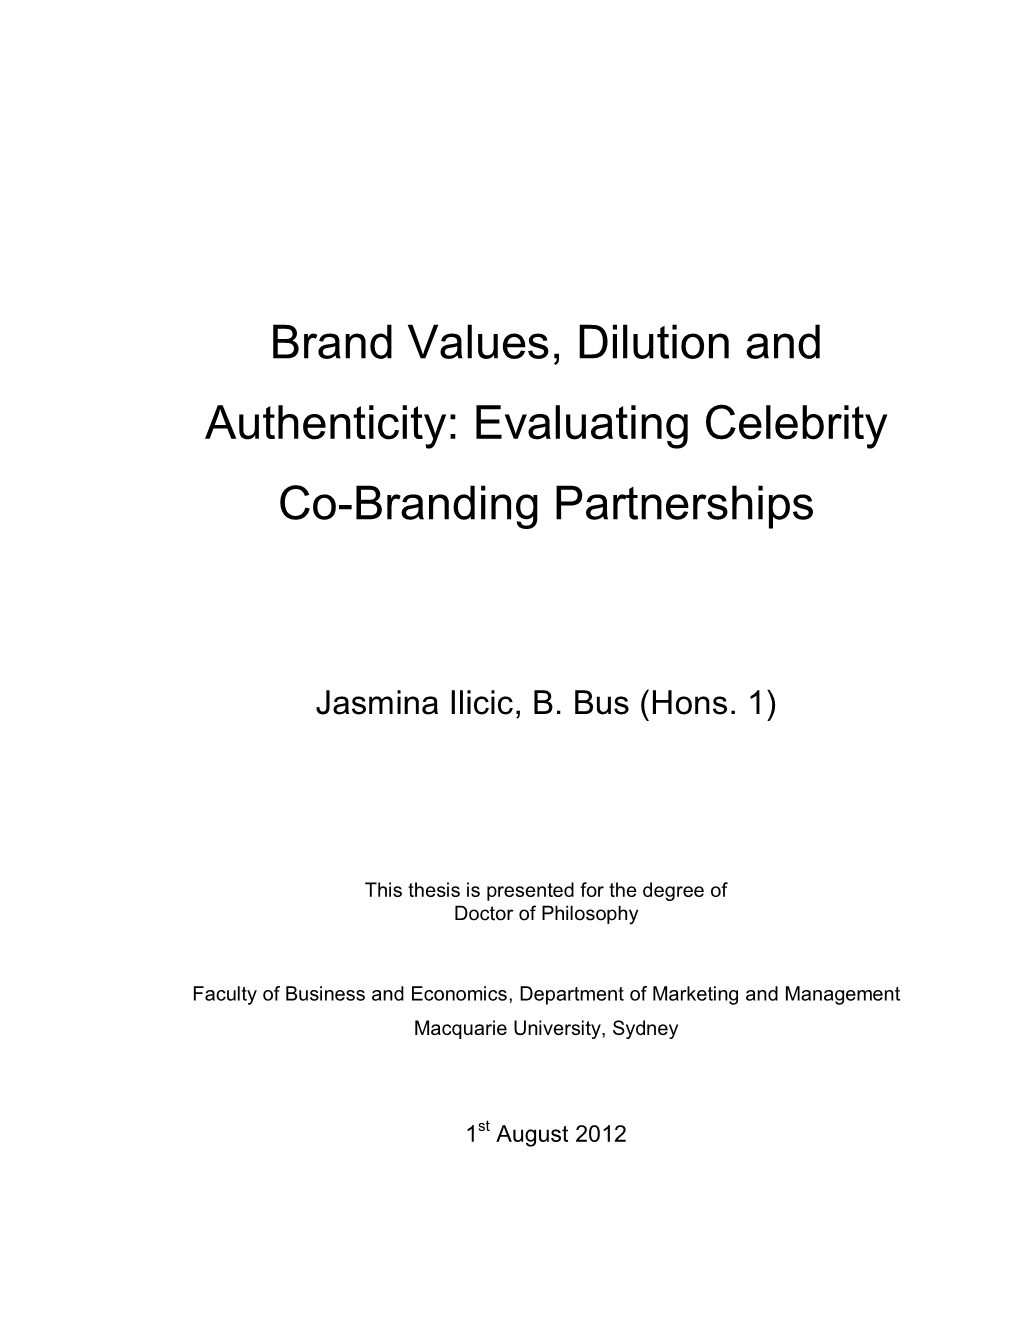 Brand Values, Dilution and Authenticity: Evaluating Celebrity Co-Branding Partnerships